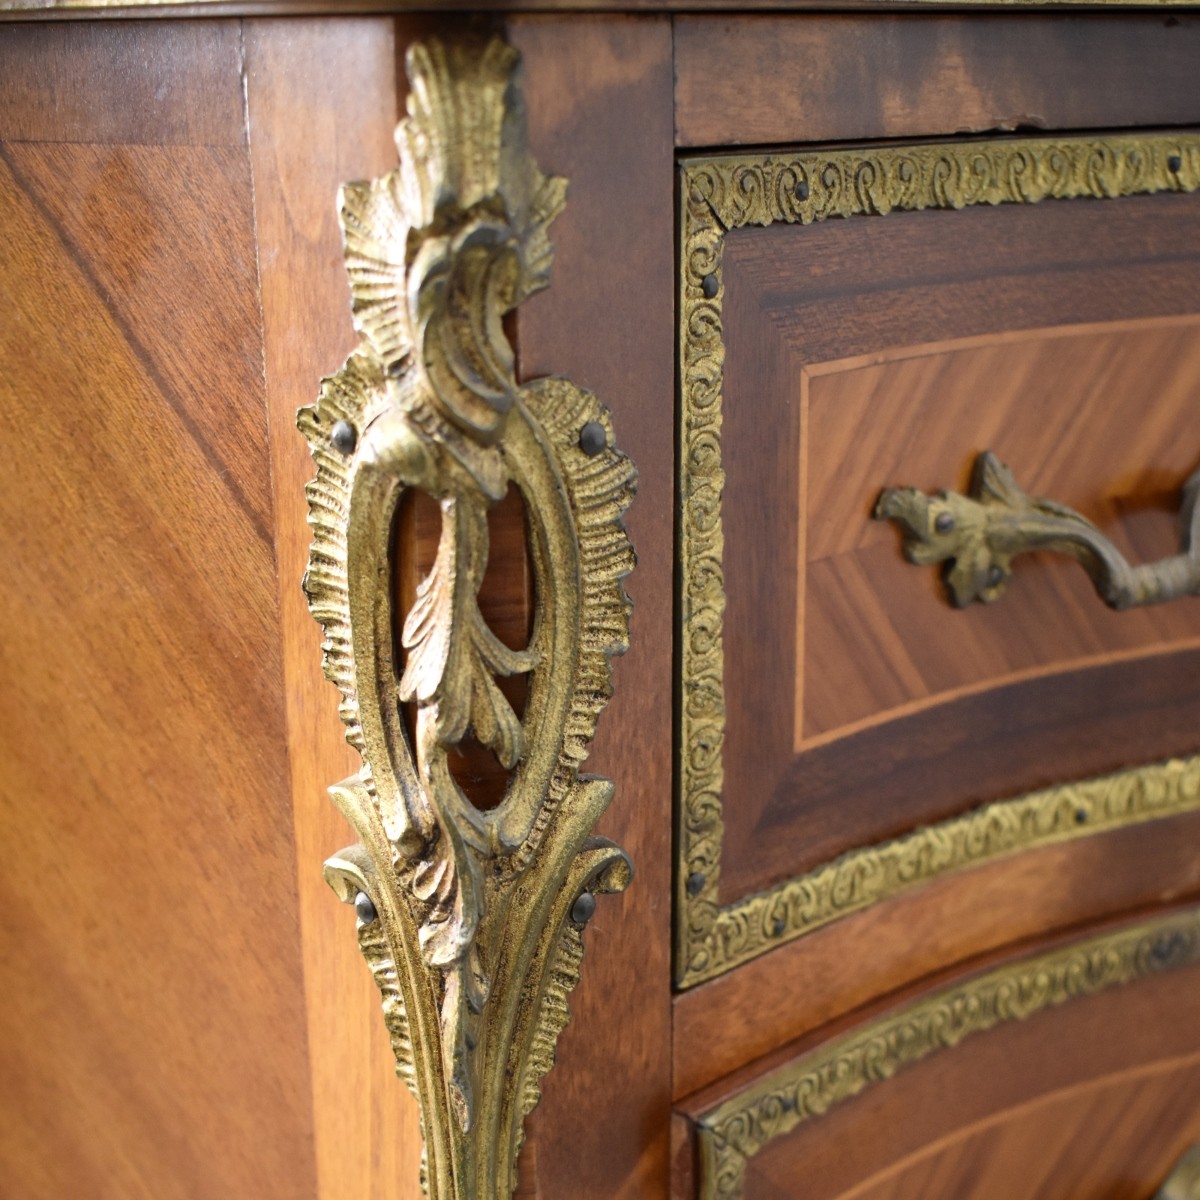 Mid 20th C. Louis XVI Style Chest of Drawers